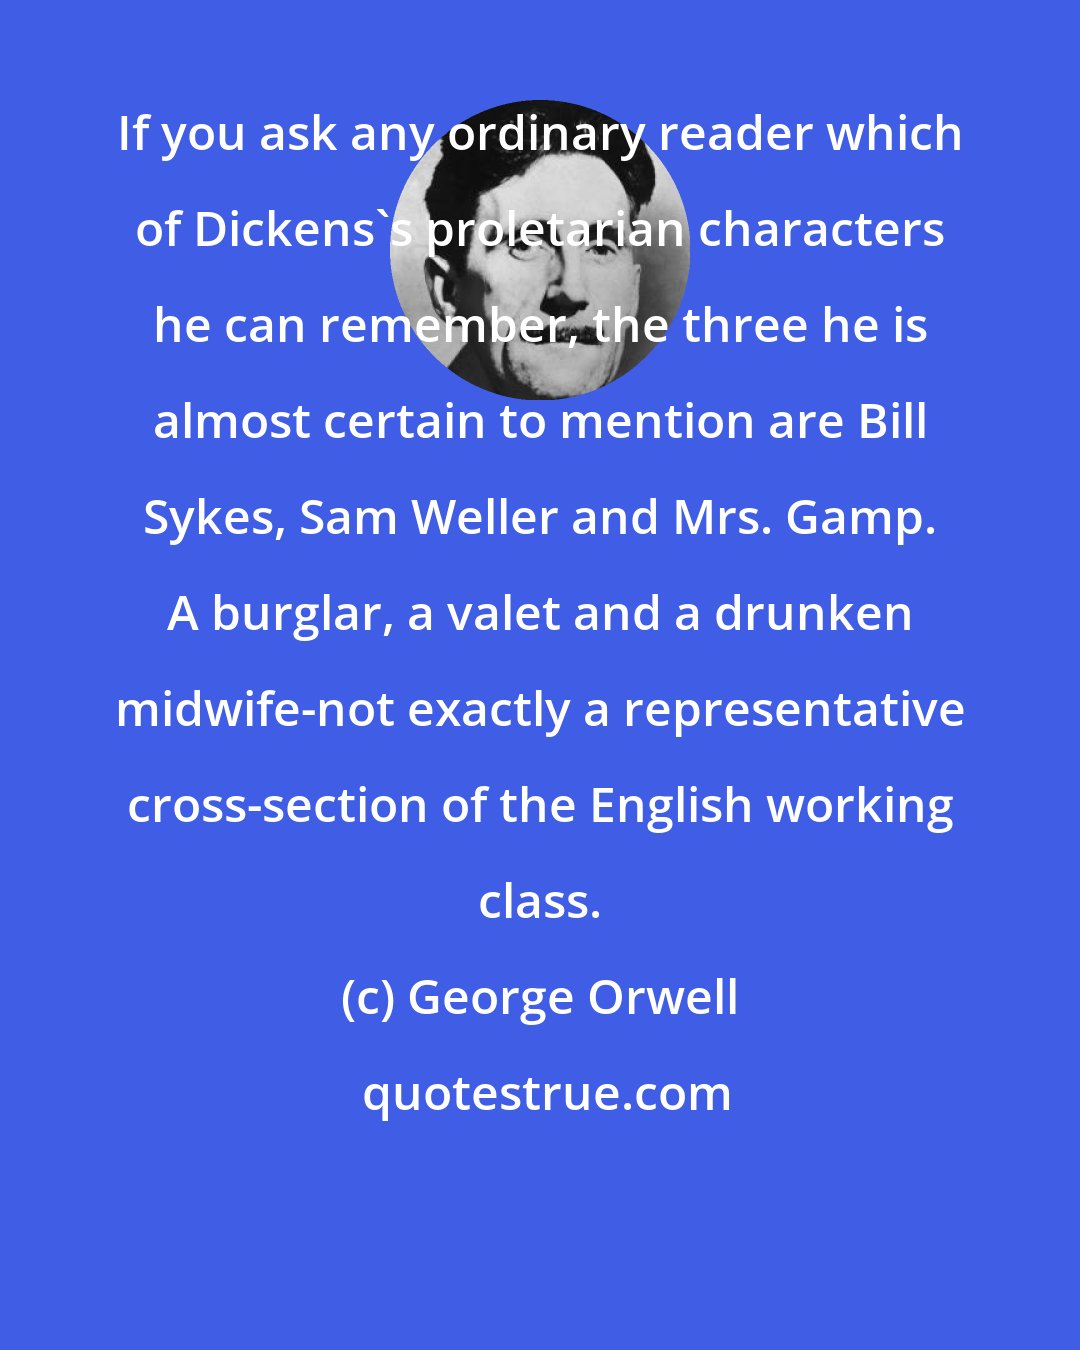 George Orwell: If you ask any ordinary reader which of Dickens's proletarian characters he can remember, the three he is almost certain to mention are Bill Sykes, Sam Weller and Mrs. Gamp. A burglar, a valet and a drunken midwife-not exactly a representative cross-section of the English working class.